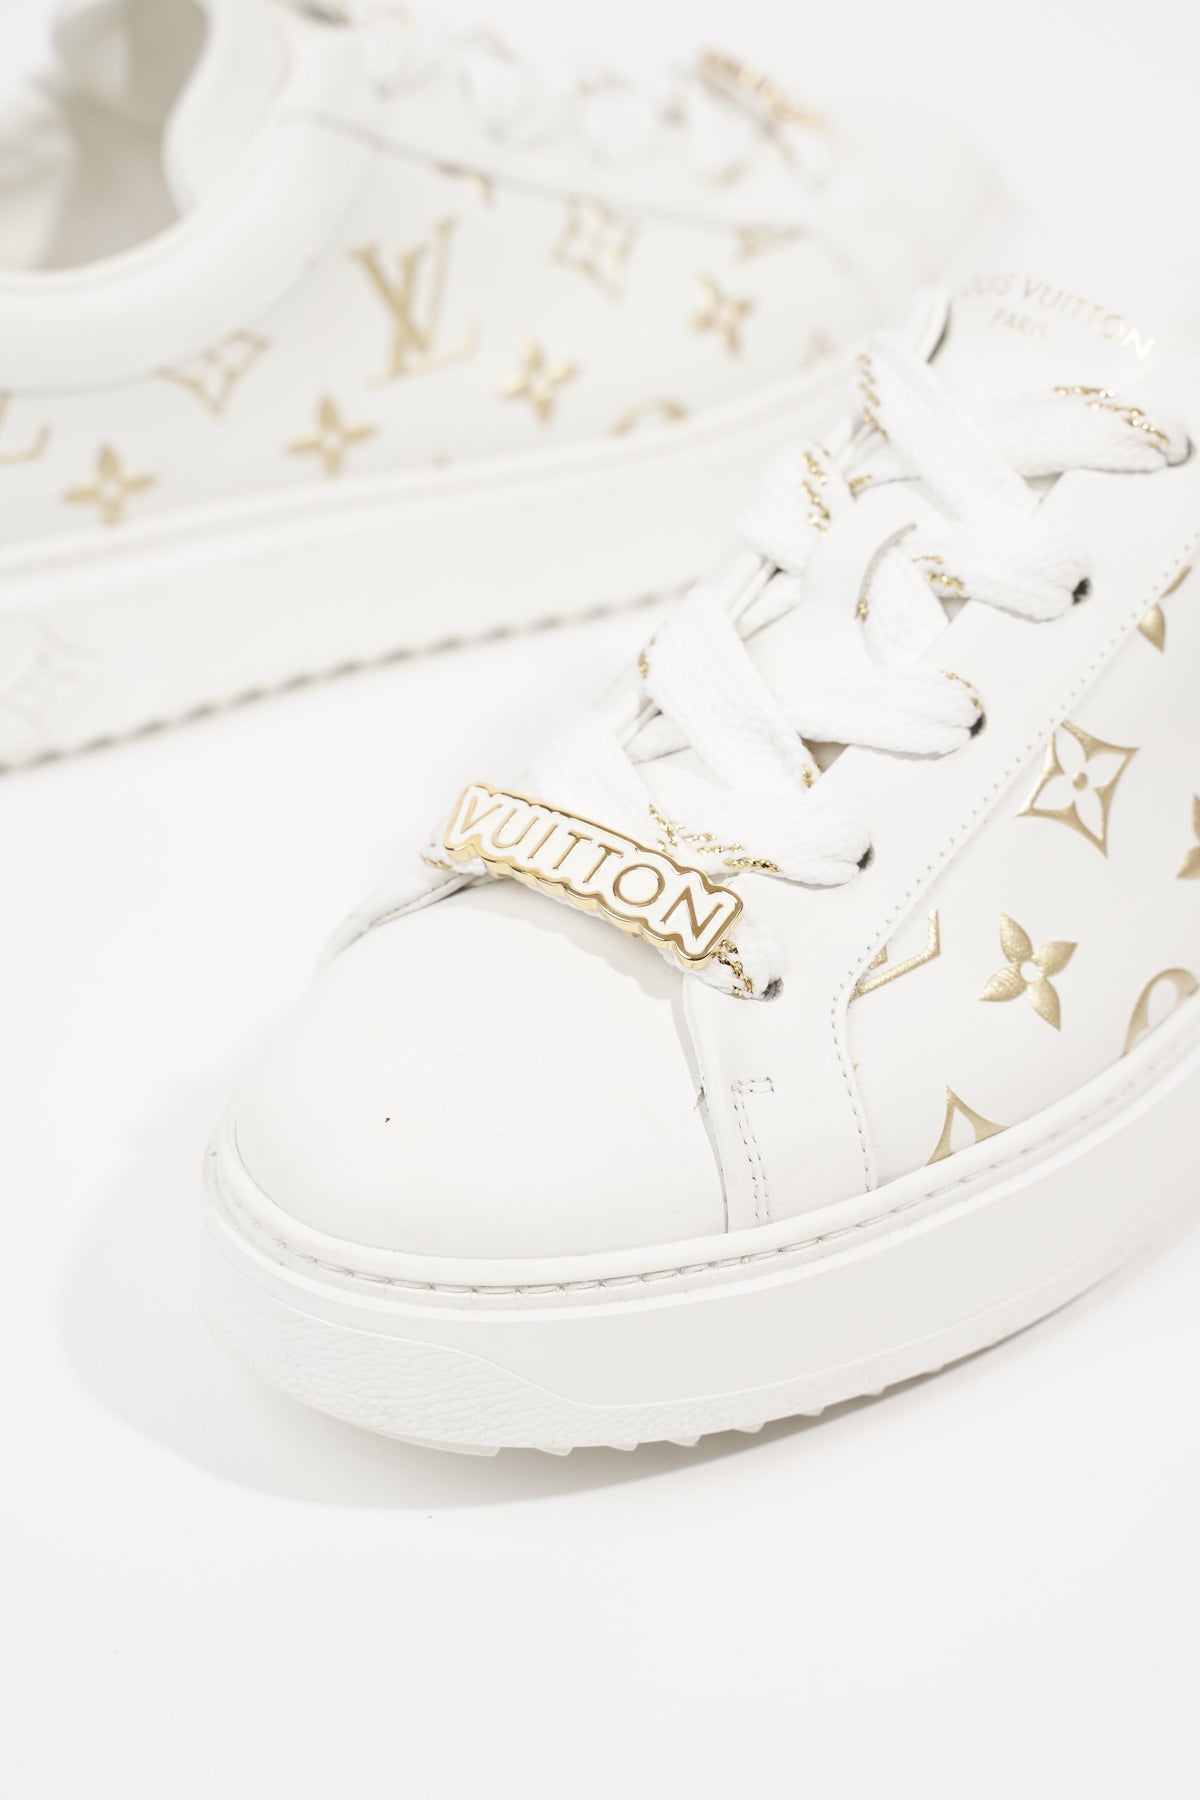 Louis Vuitton® Time Out Sneaker Gold. Size 36.0  Womens shoes sneakers,  Sneakers, Sneaker collection